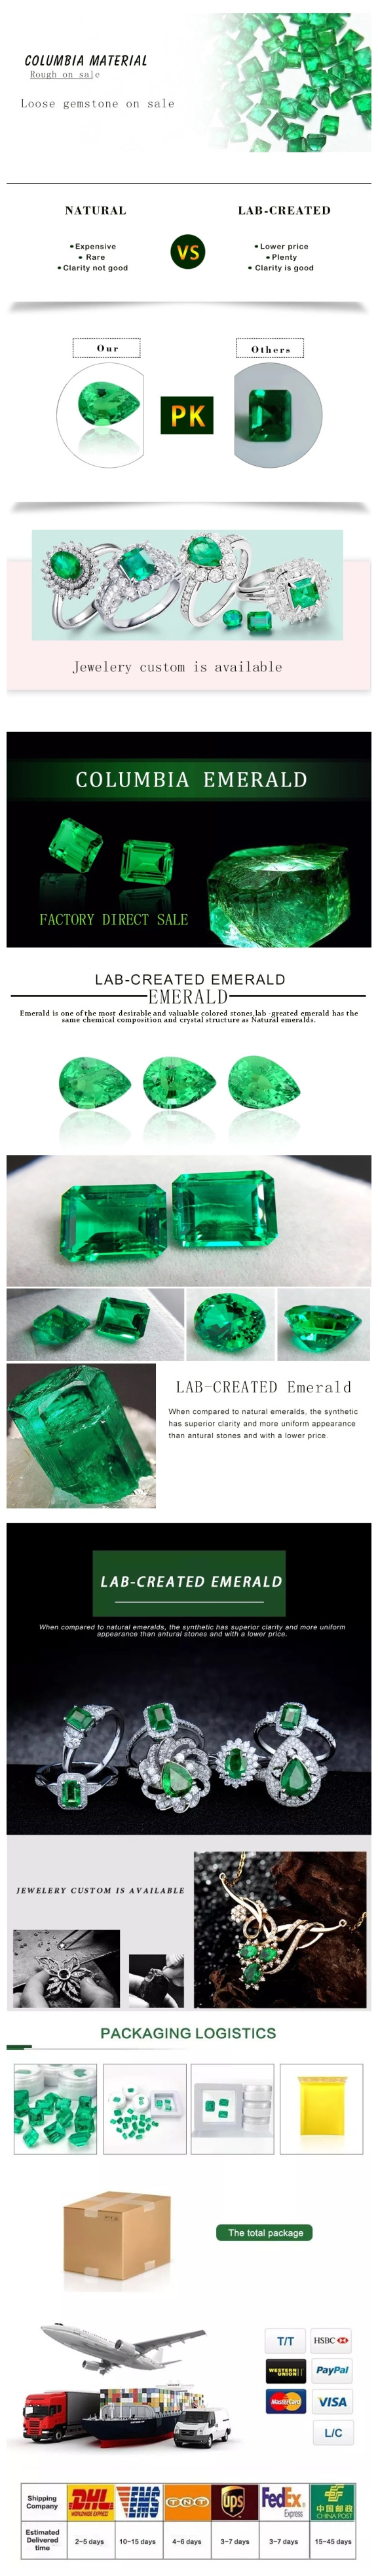 MGO Gem Lab Grown Created Synthetic Hydrothermal Pear Square Fancy Cut Columbian Emerald Loose Gemstone